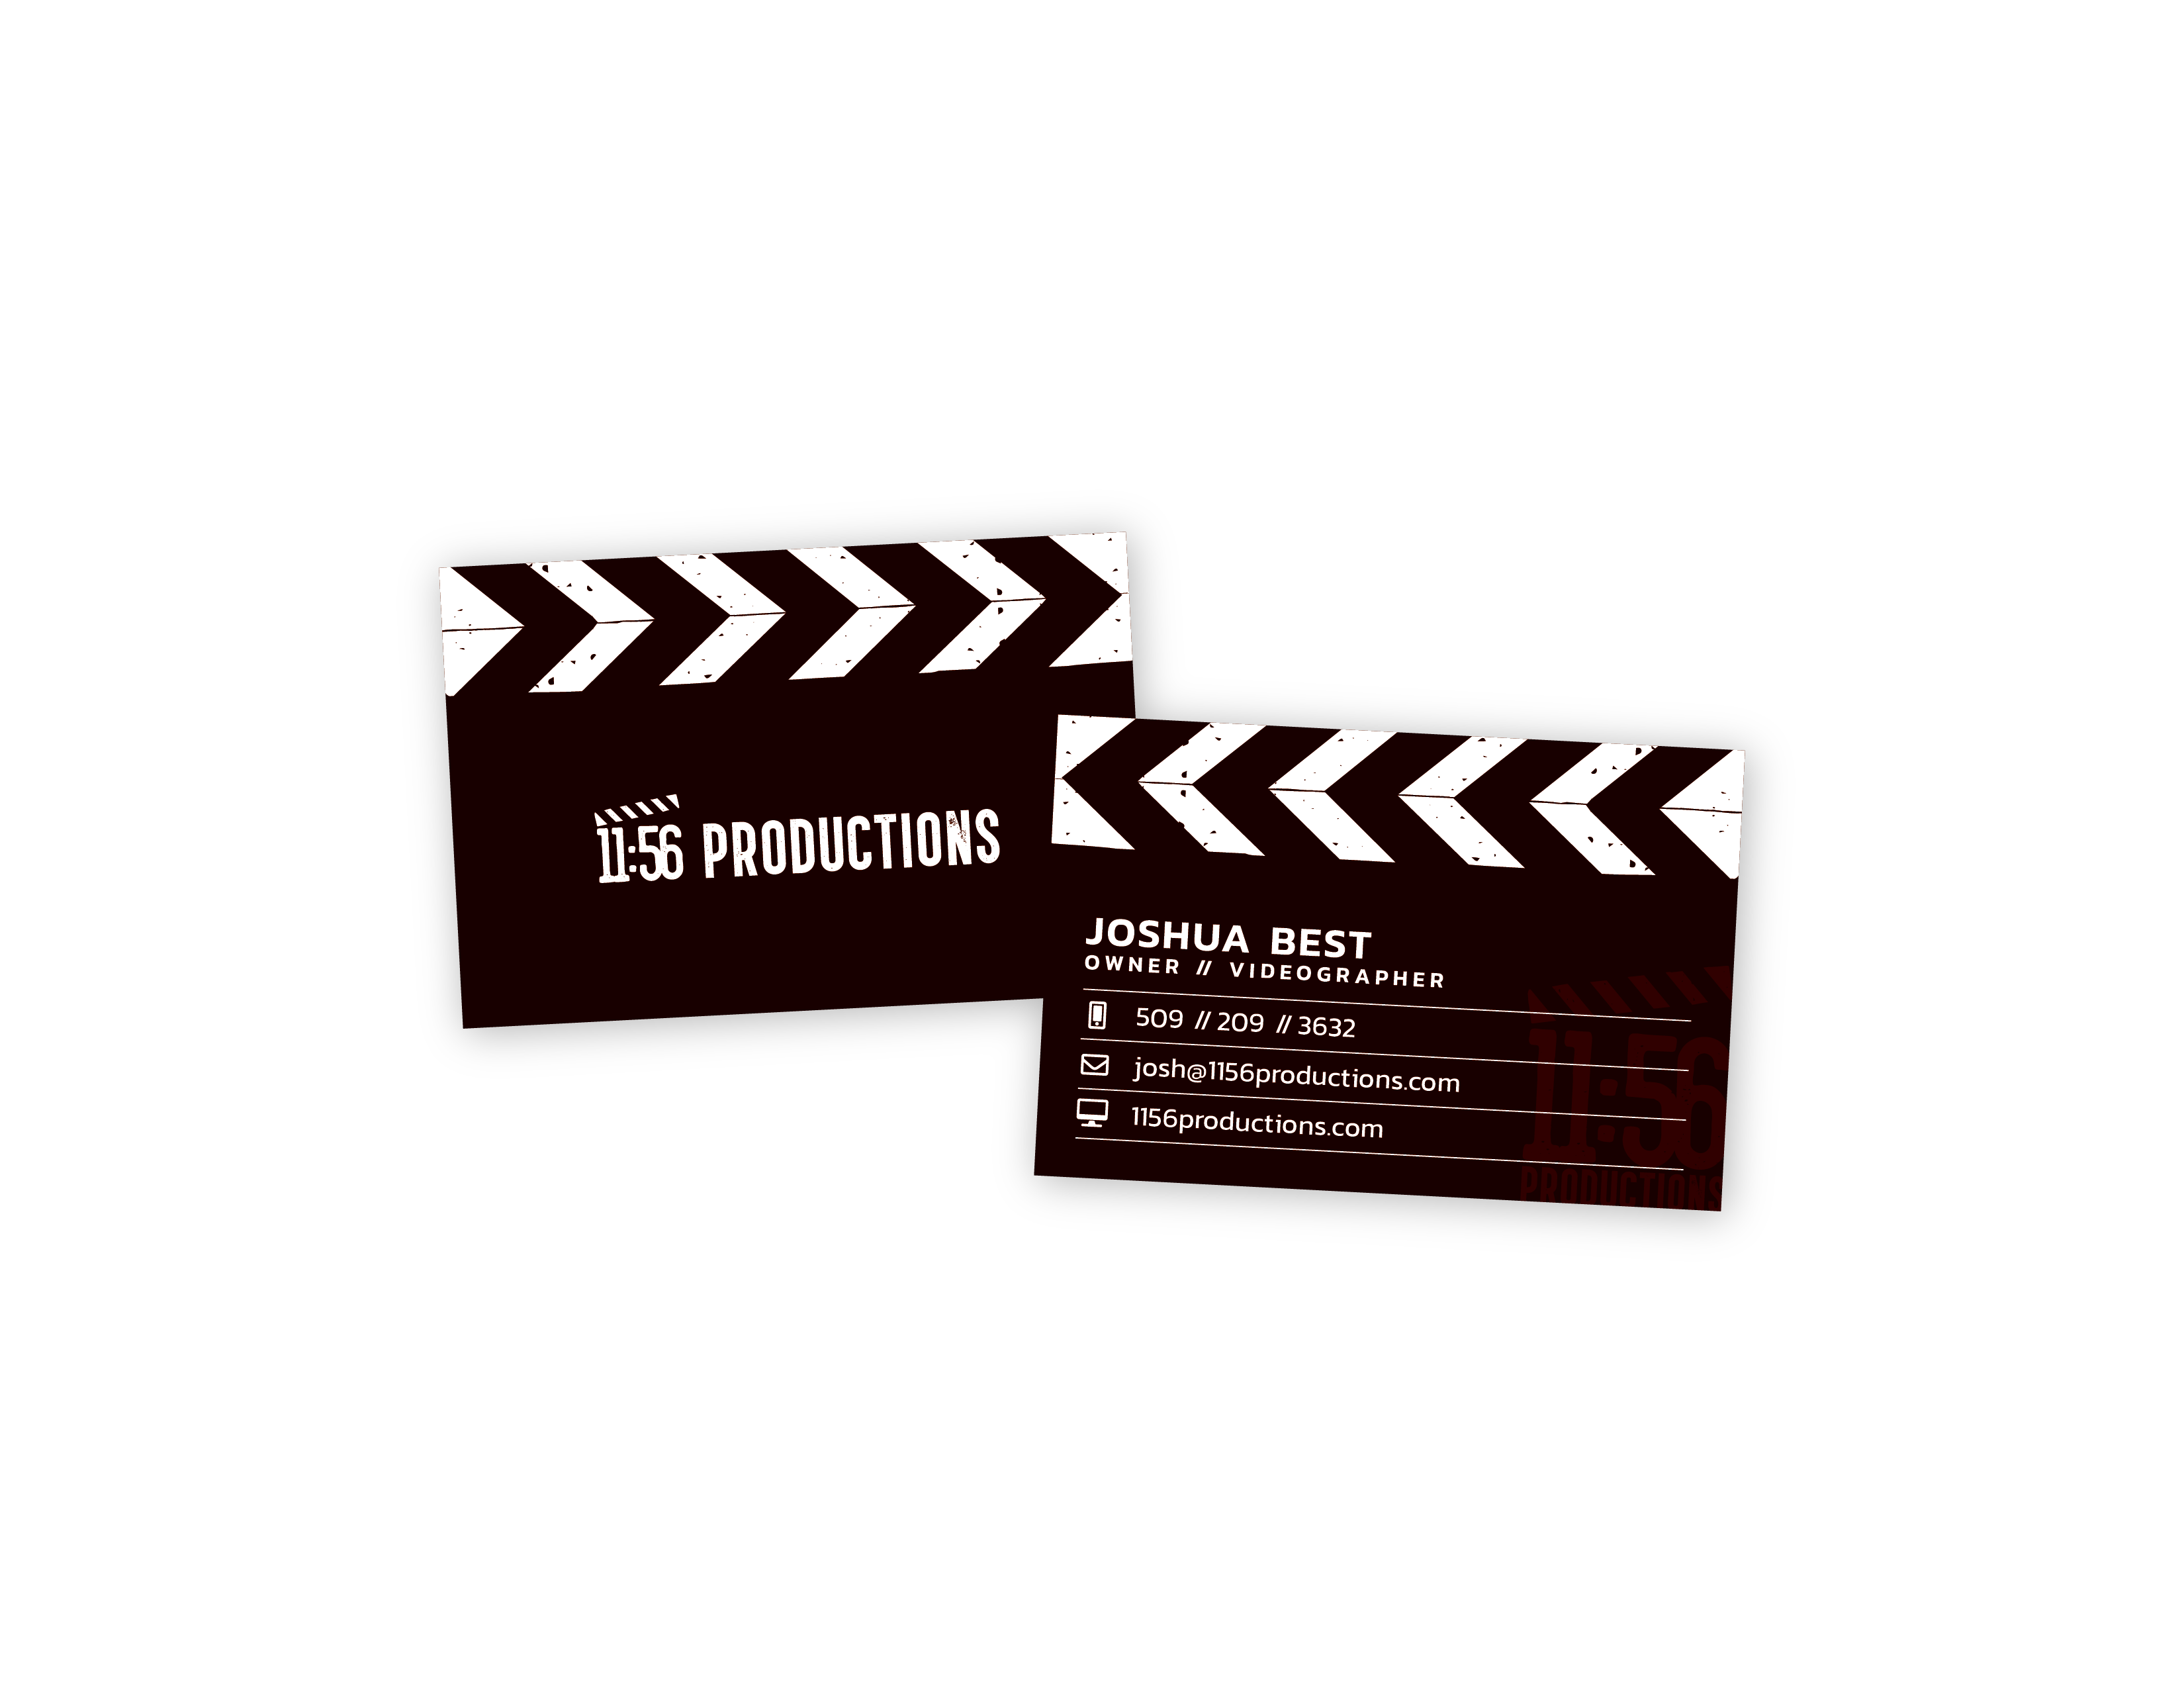 11:56 Productions business cards